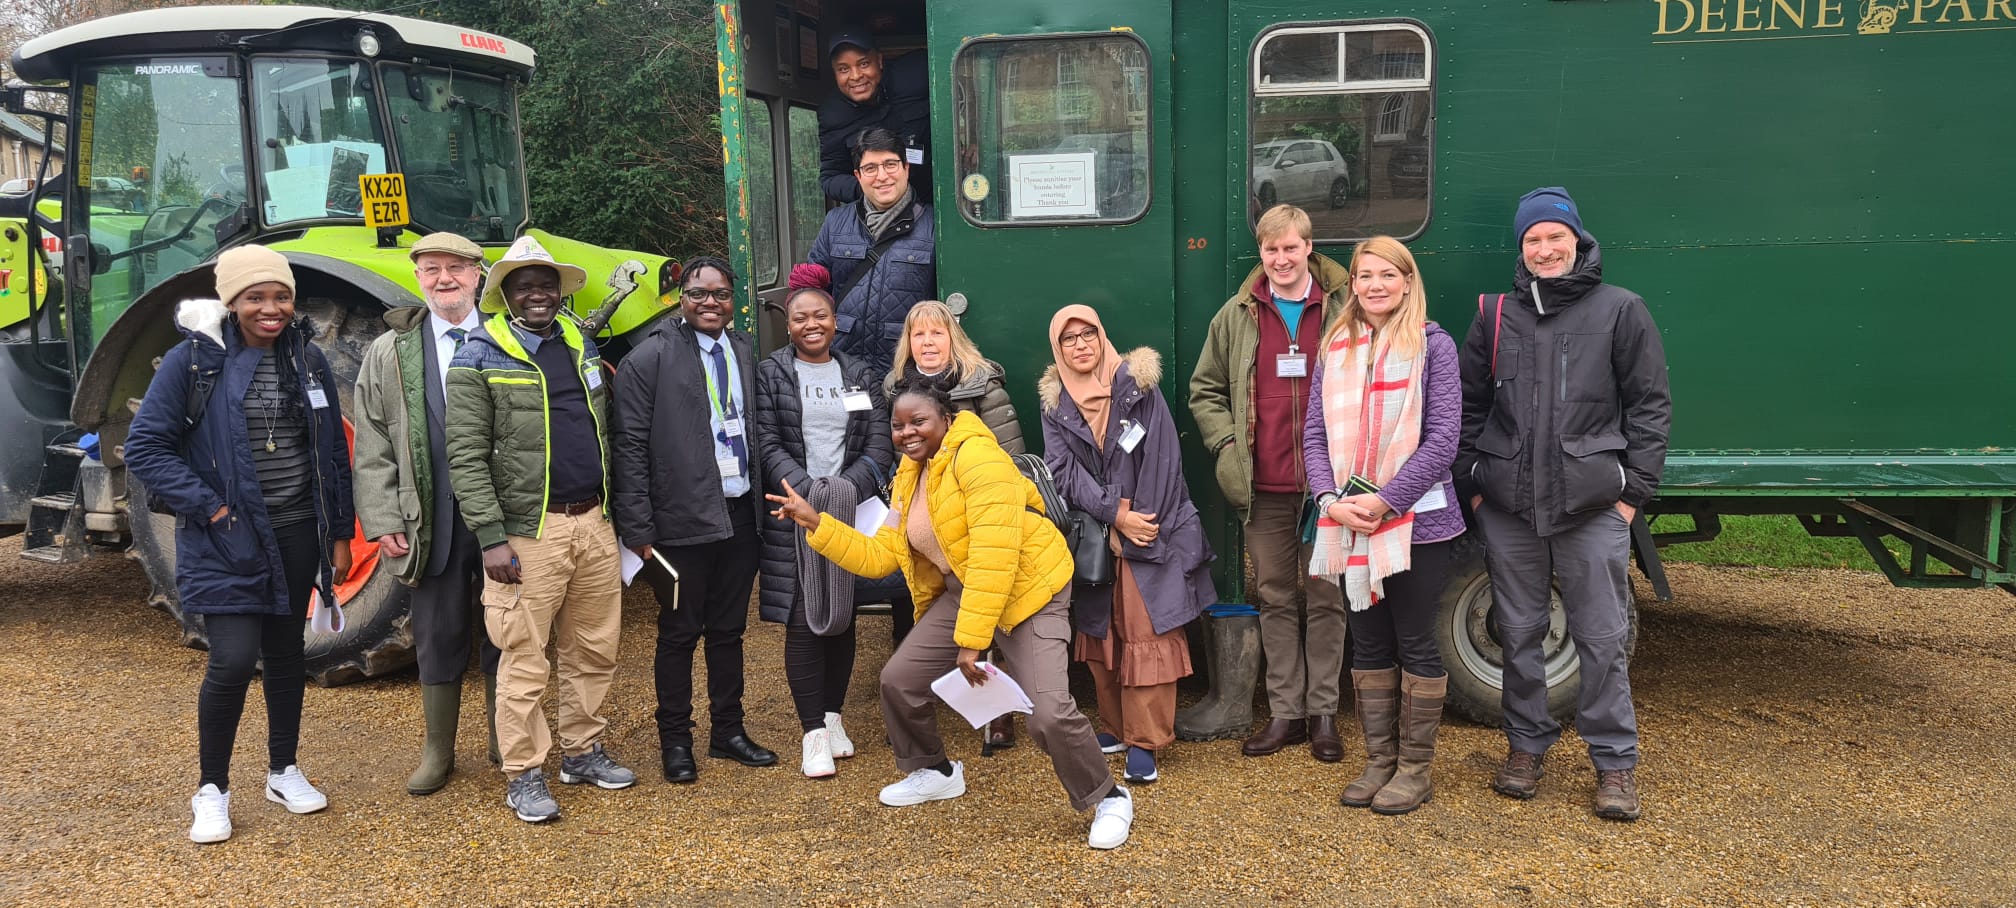 Agricultural students from developing countries see the benefits of adding value and tapping into natural resources on Northamptonshire estate, Deene Park